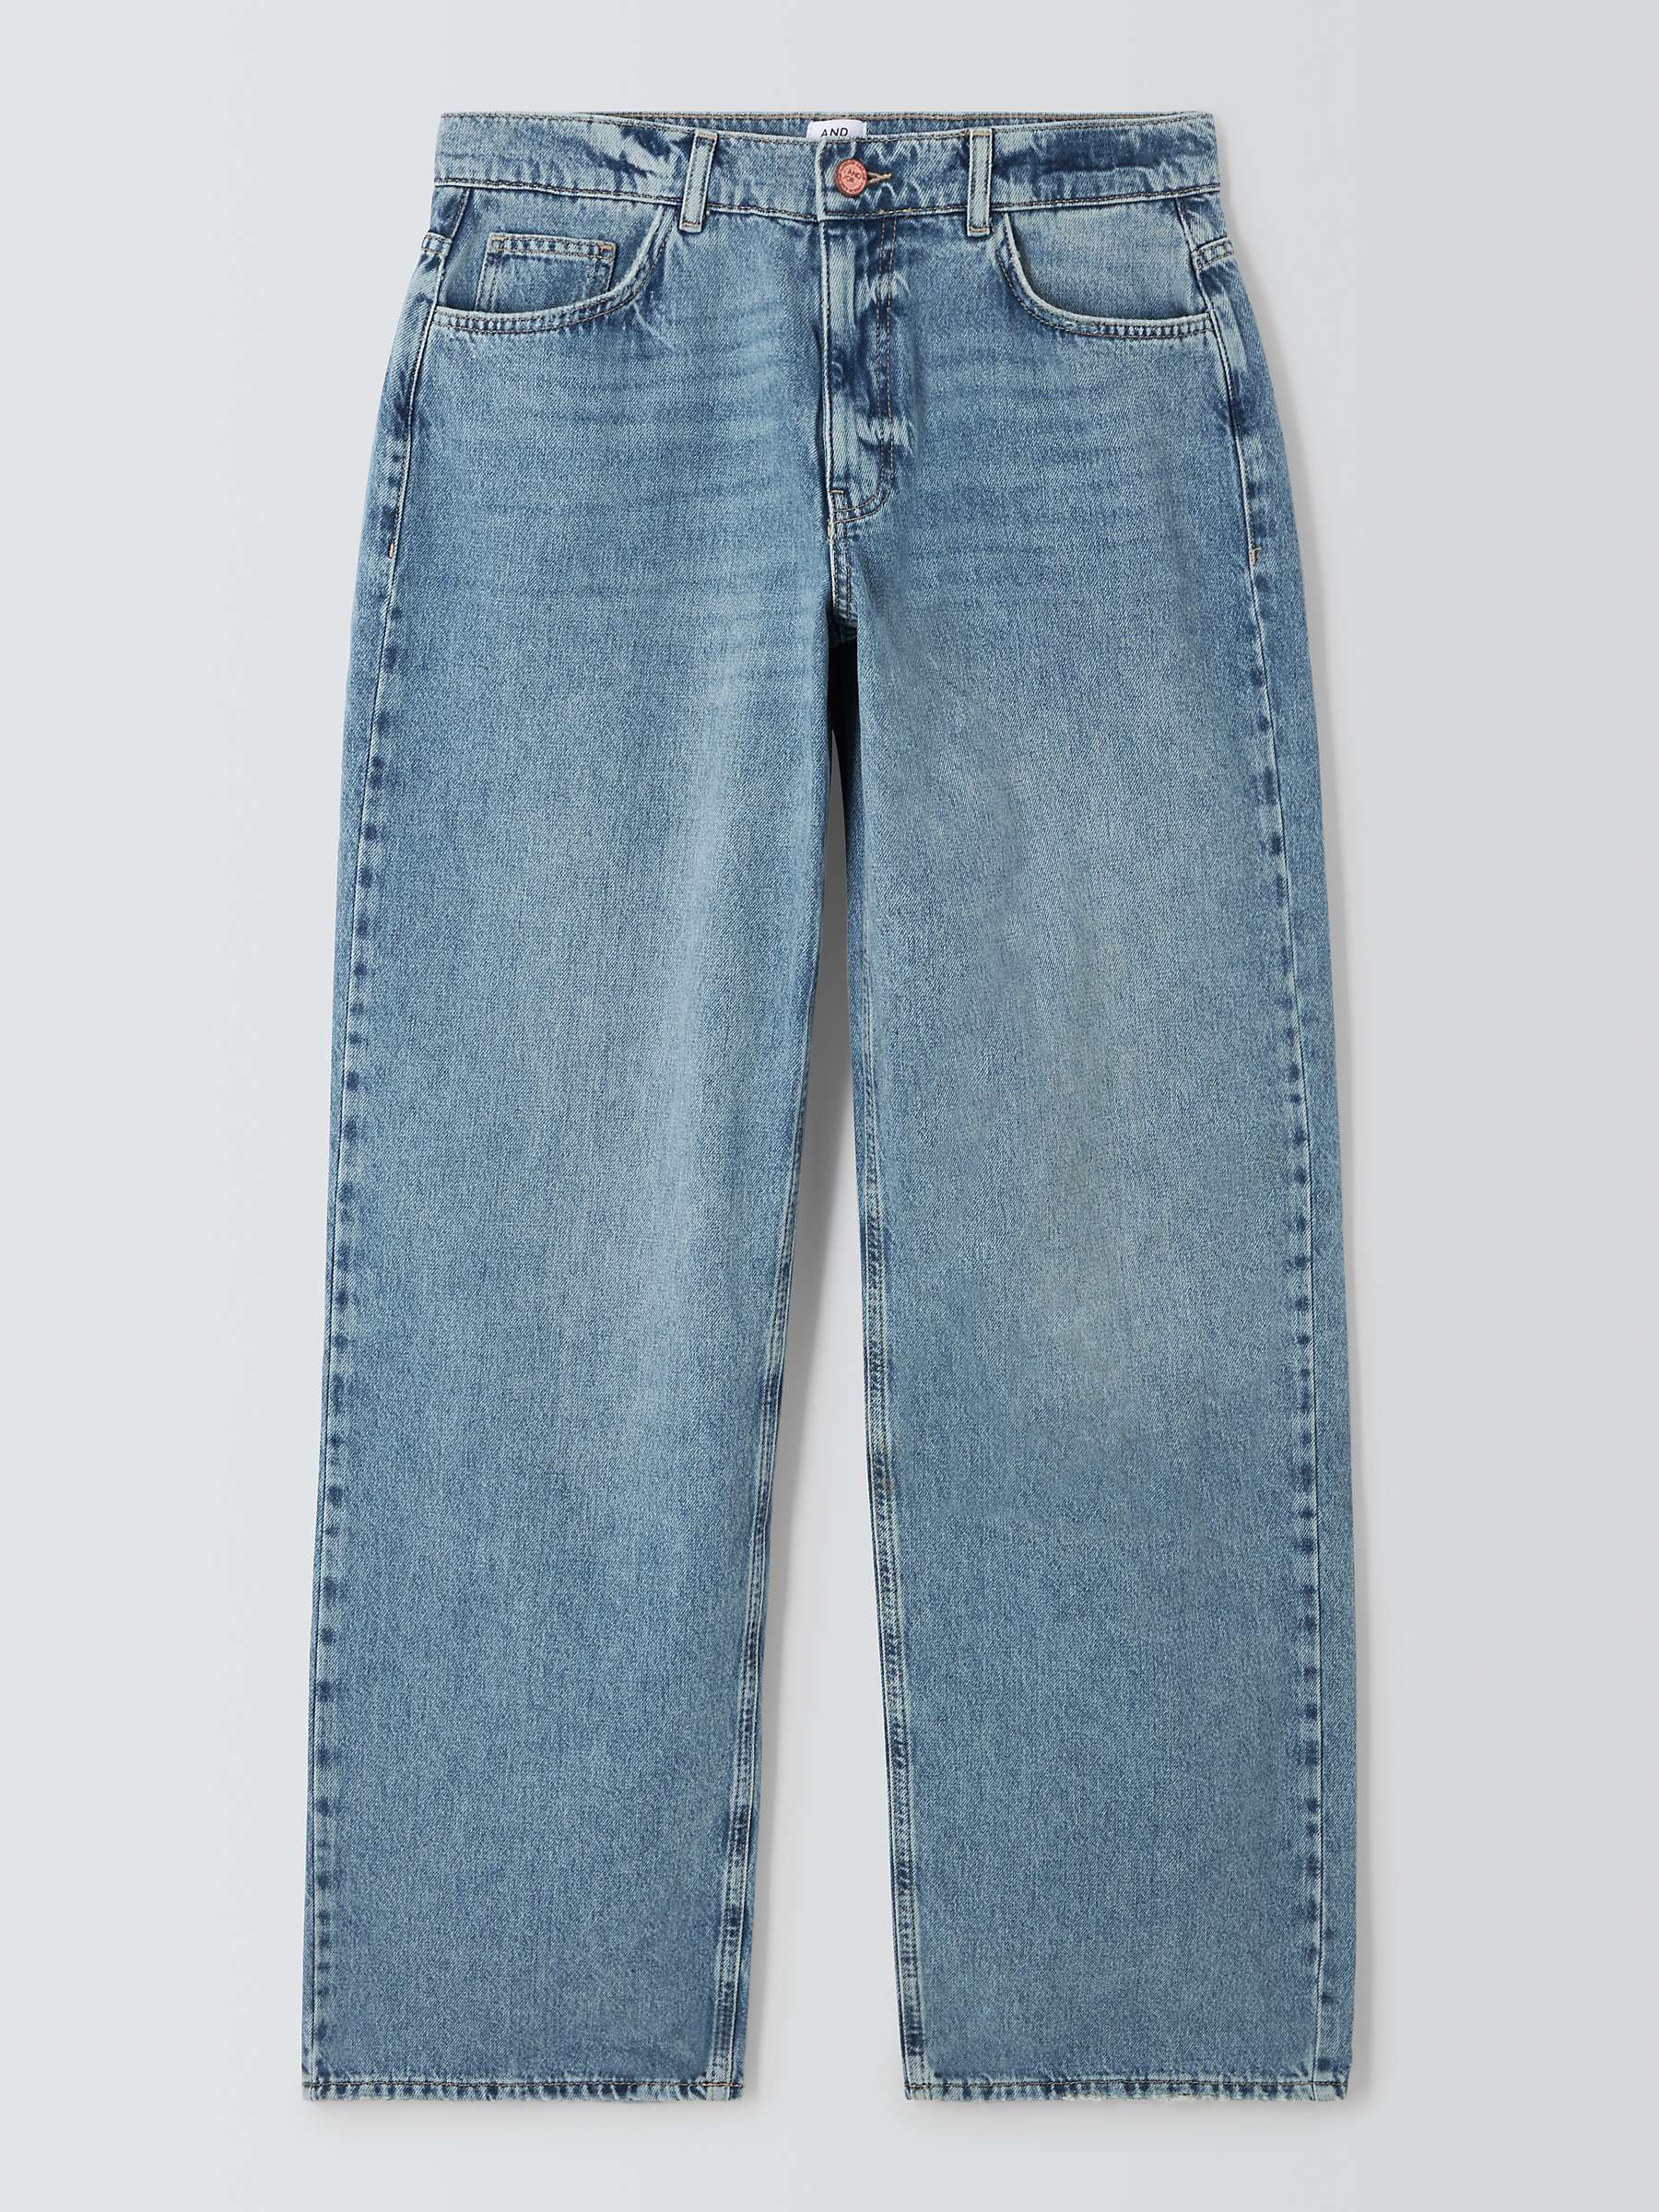 Buy AND/OR Pasadena Puddle Jeans, Blue Online at johnlewis.com